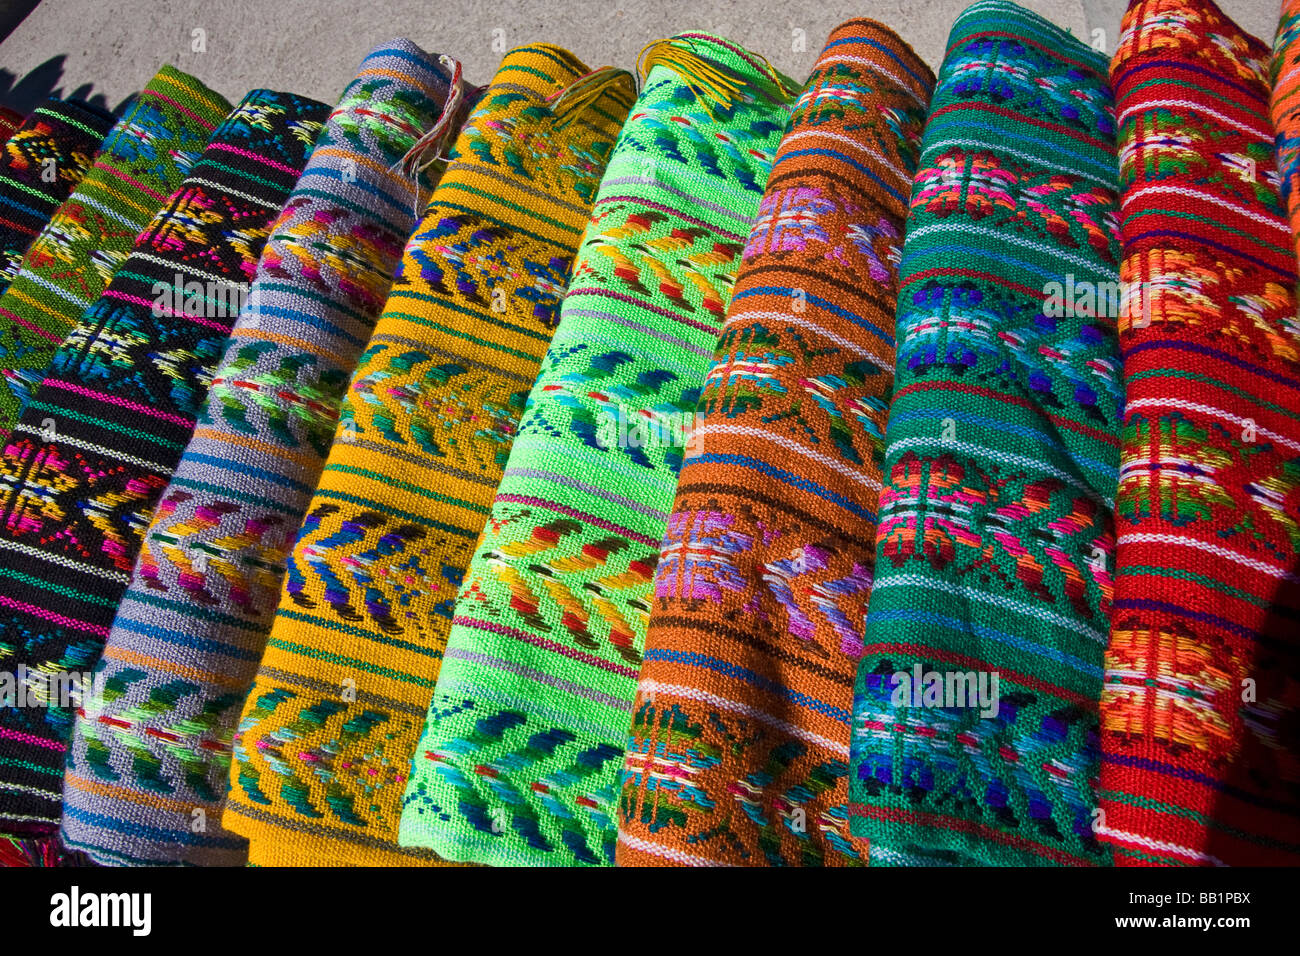 Woven shawls made by Tarahumara Indians who live in Copper Canyon Mexico. Stock Photo